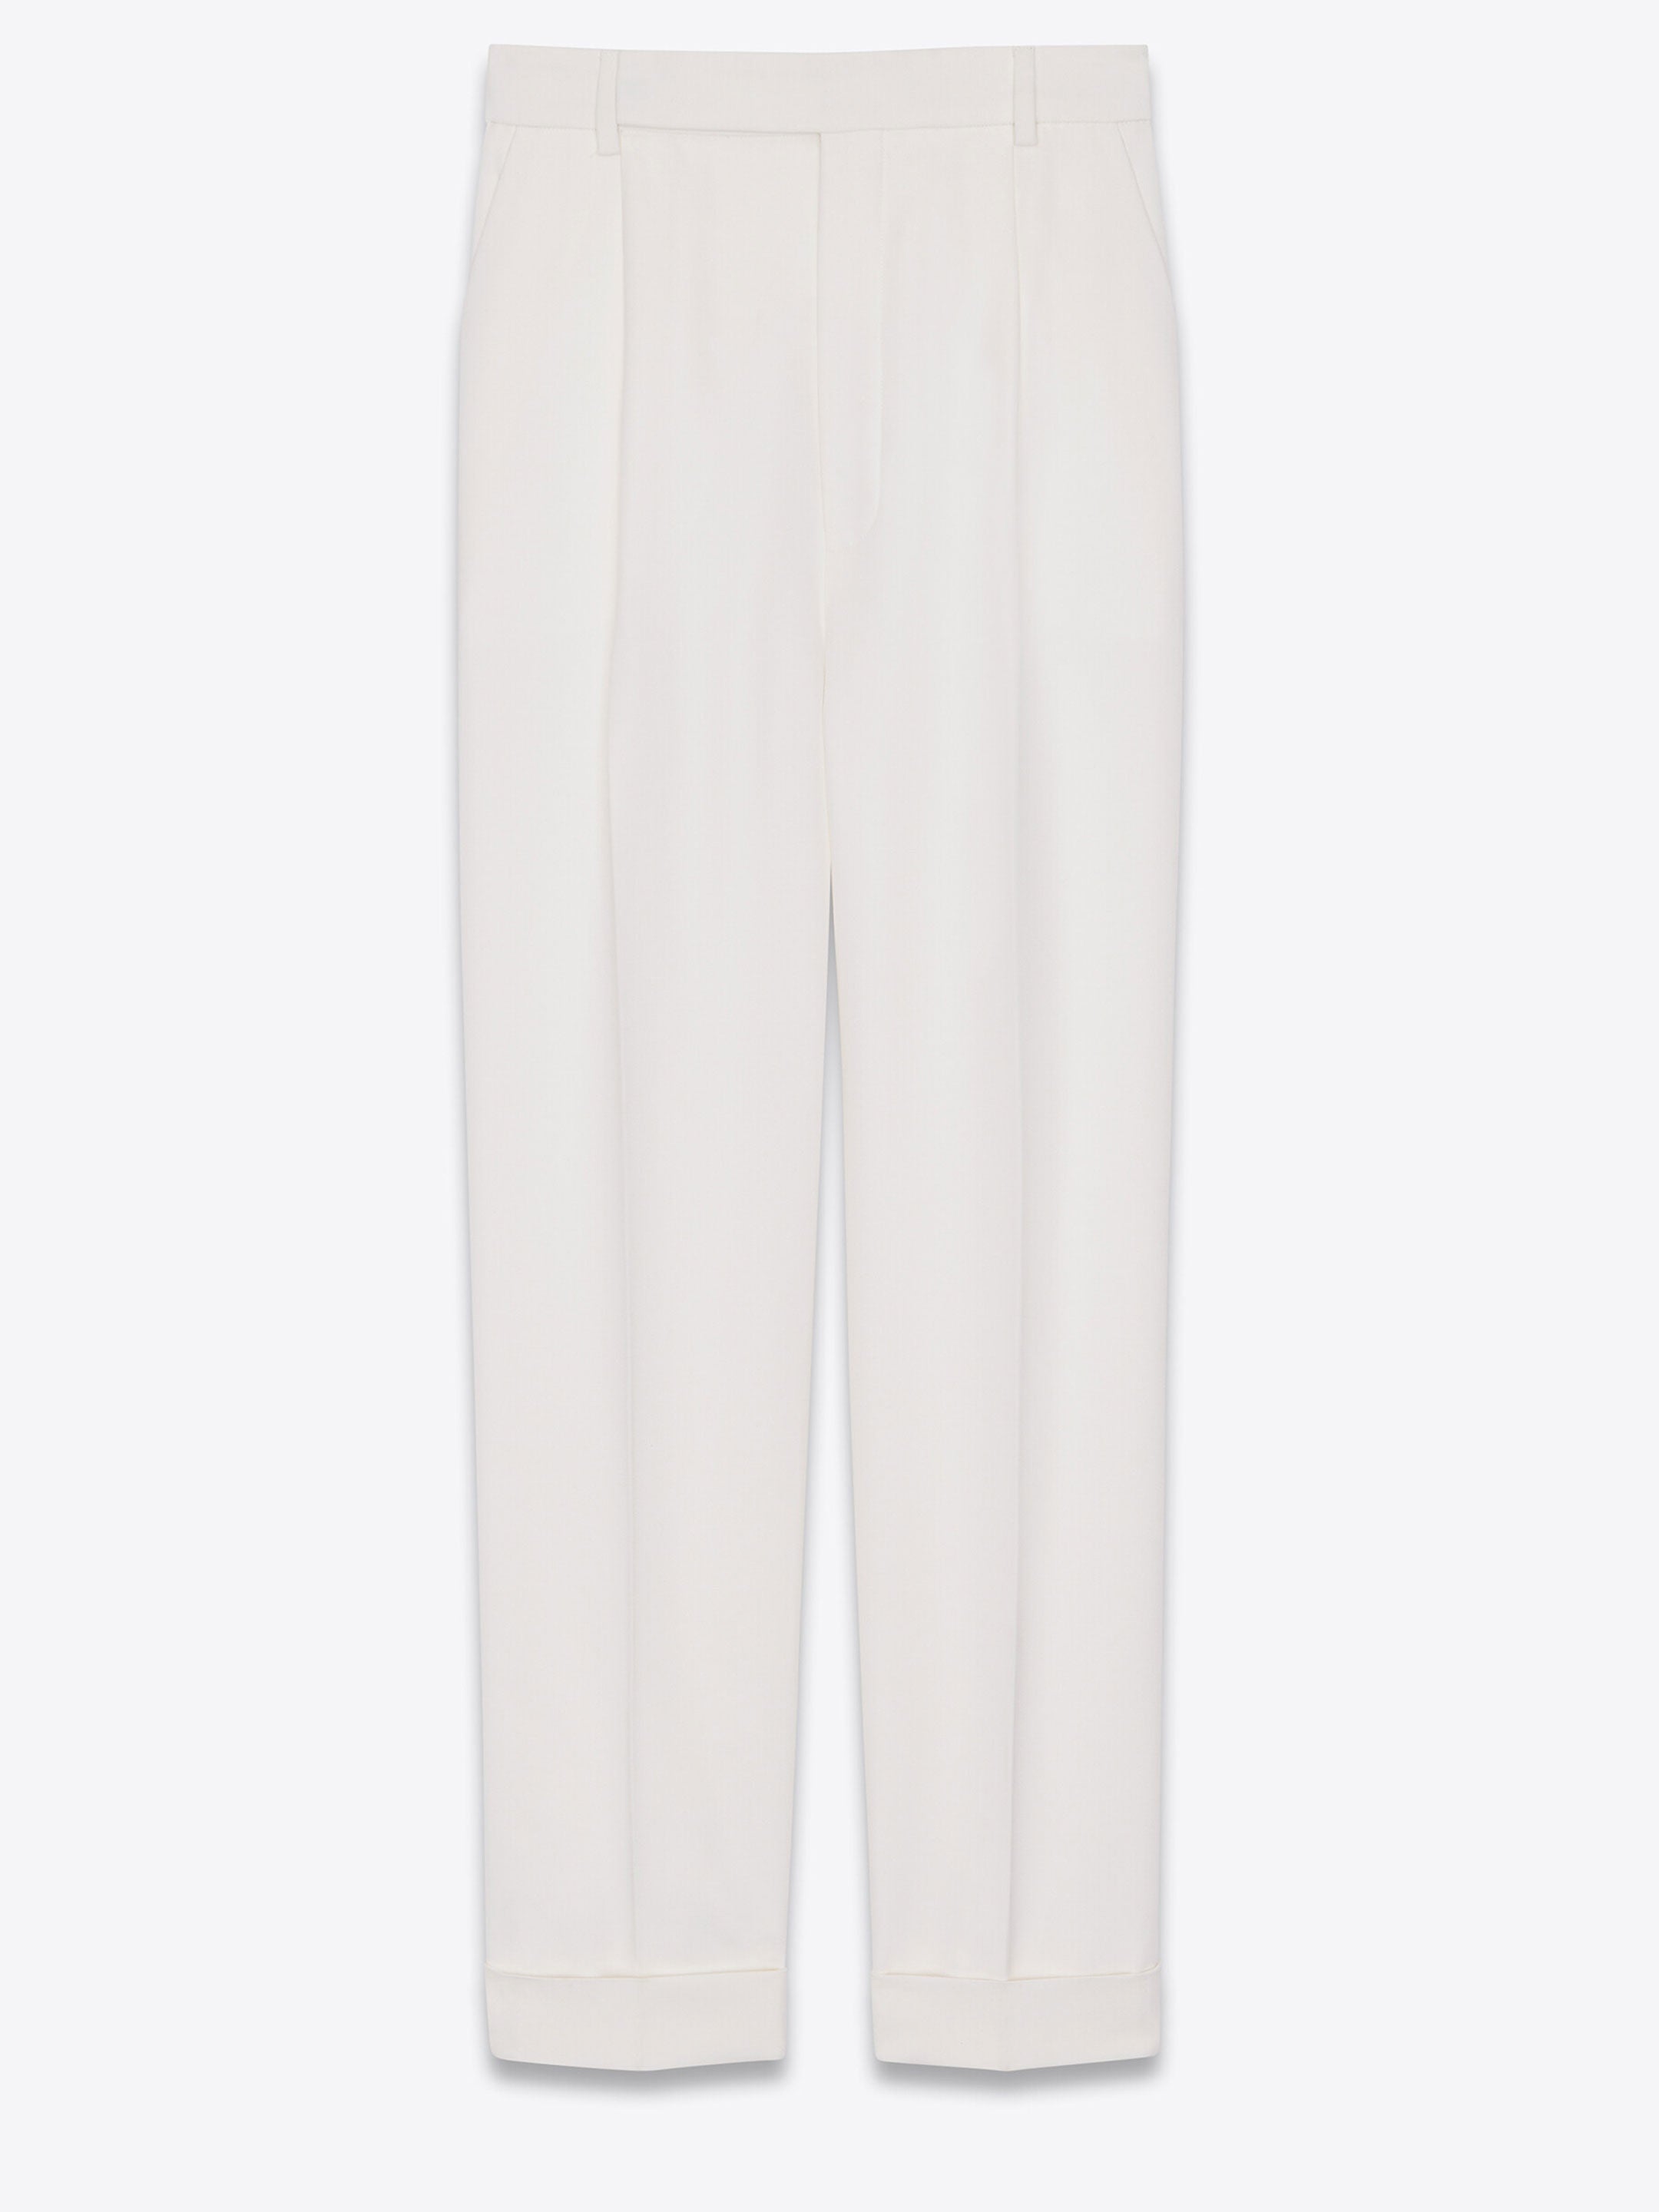 White tailored trousers